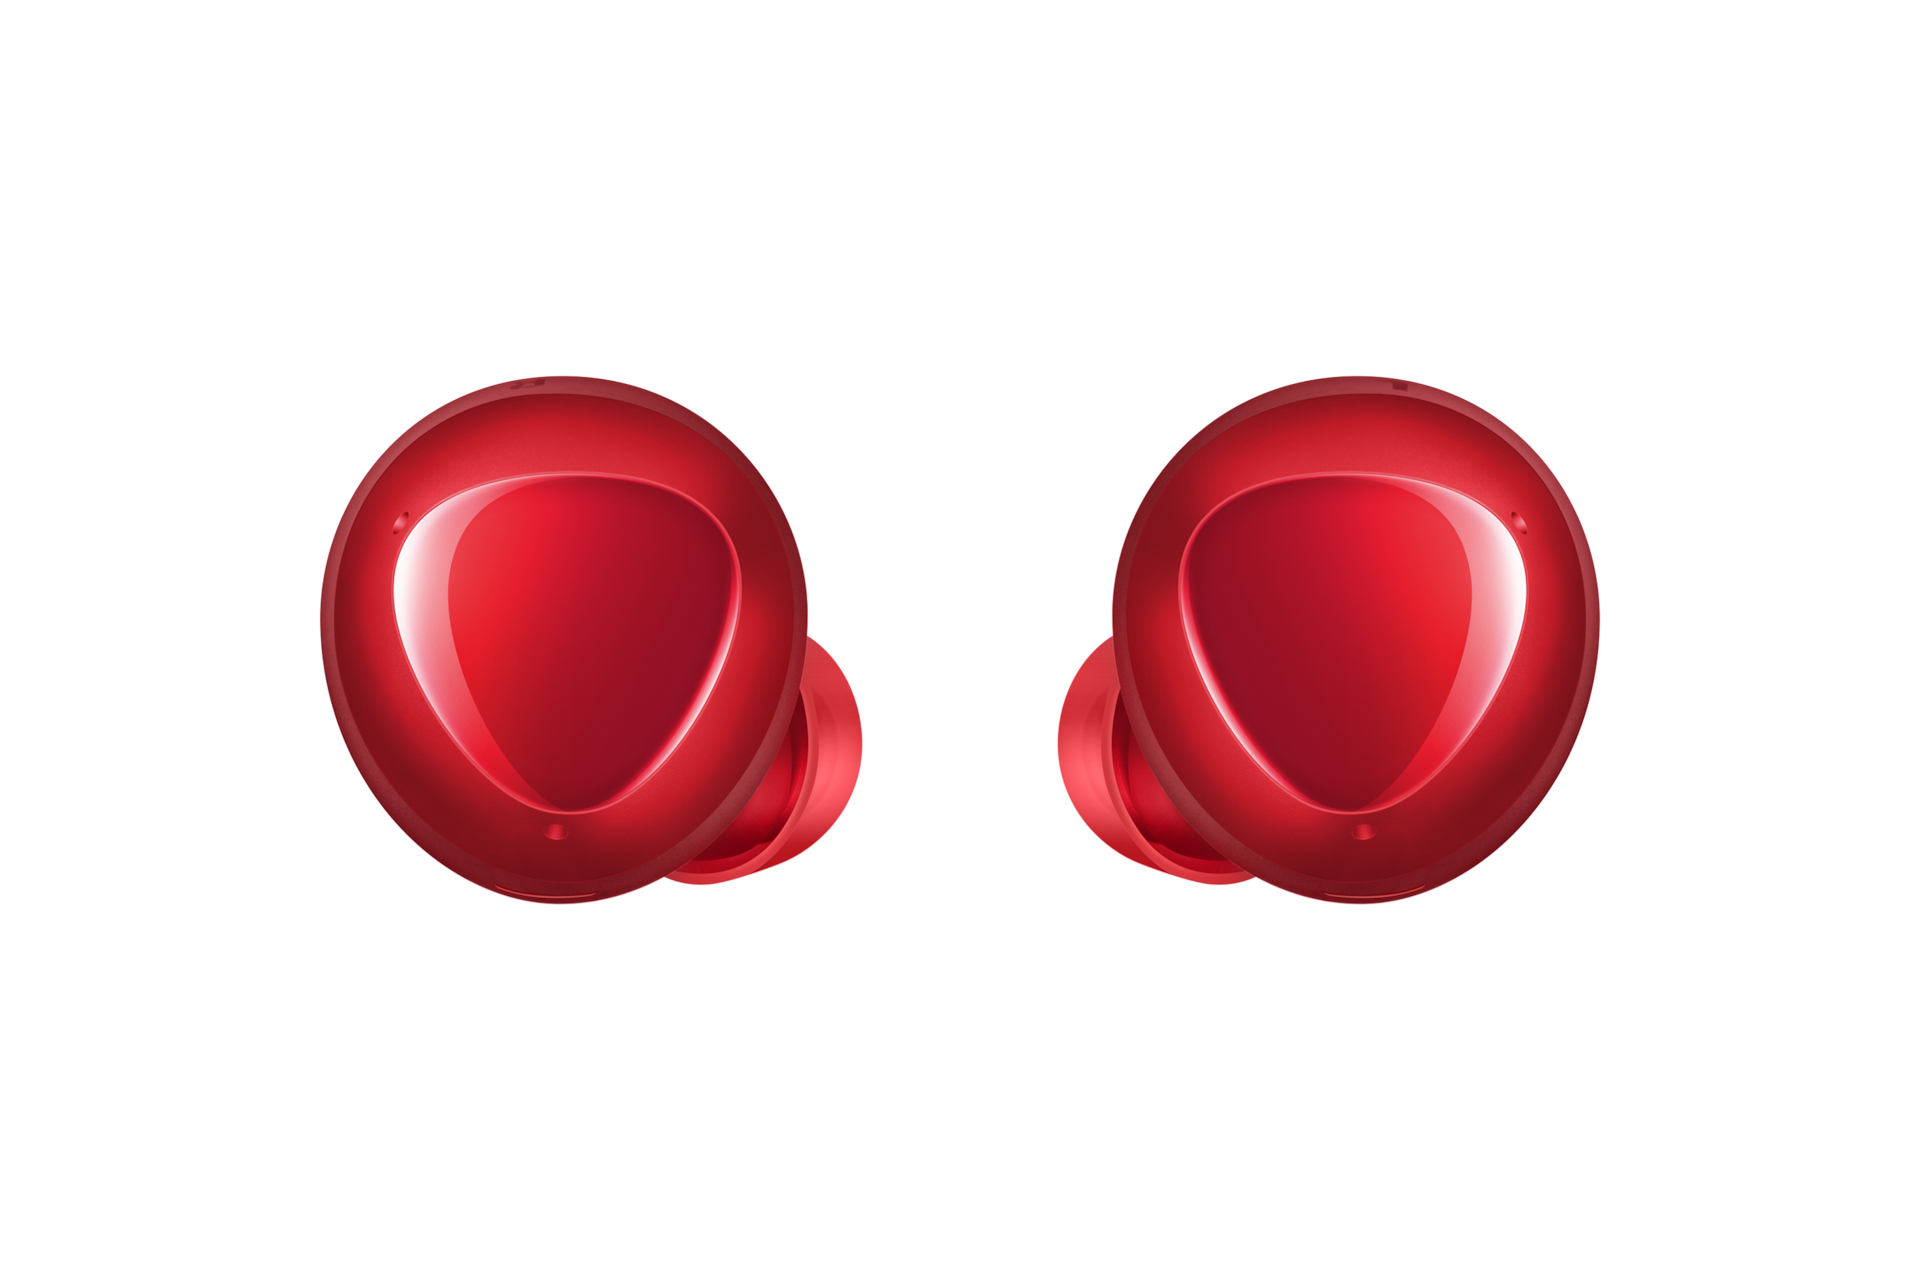 Exterior of the Samsung Galaxy Buds Plus in red